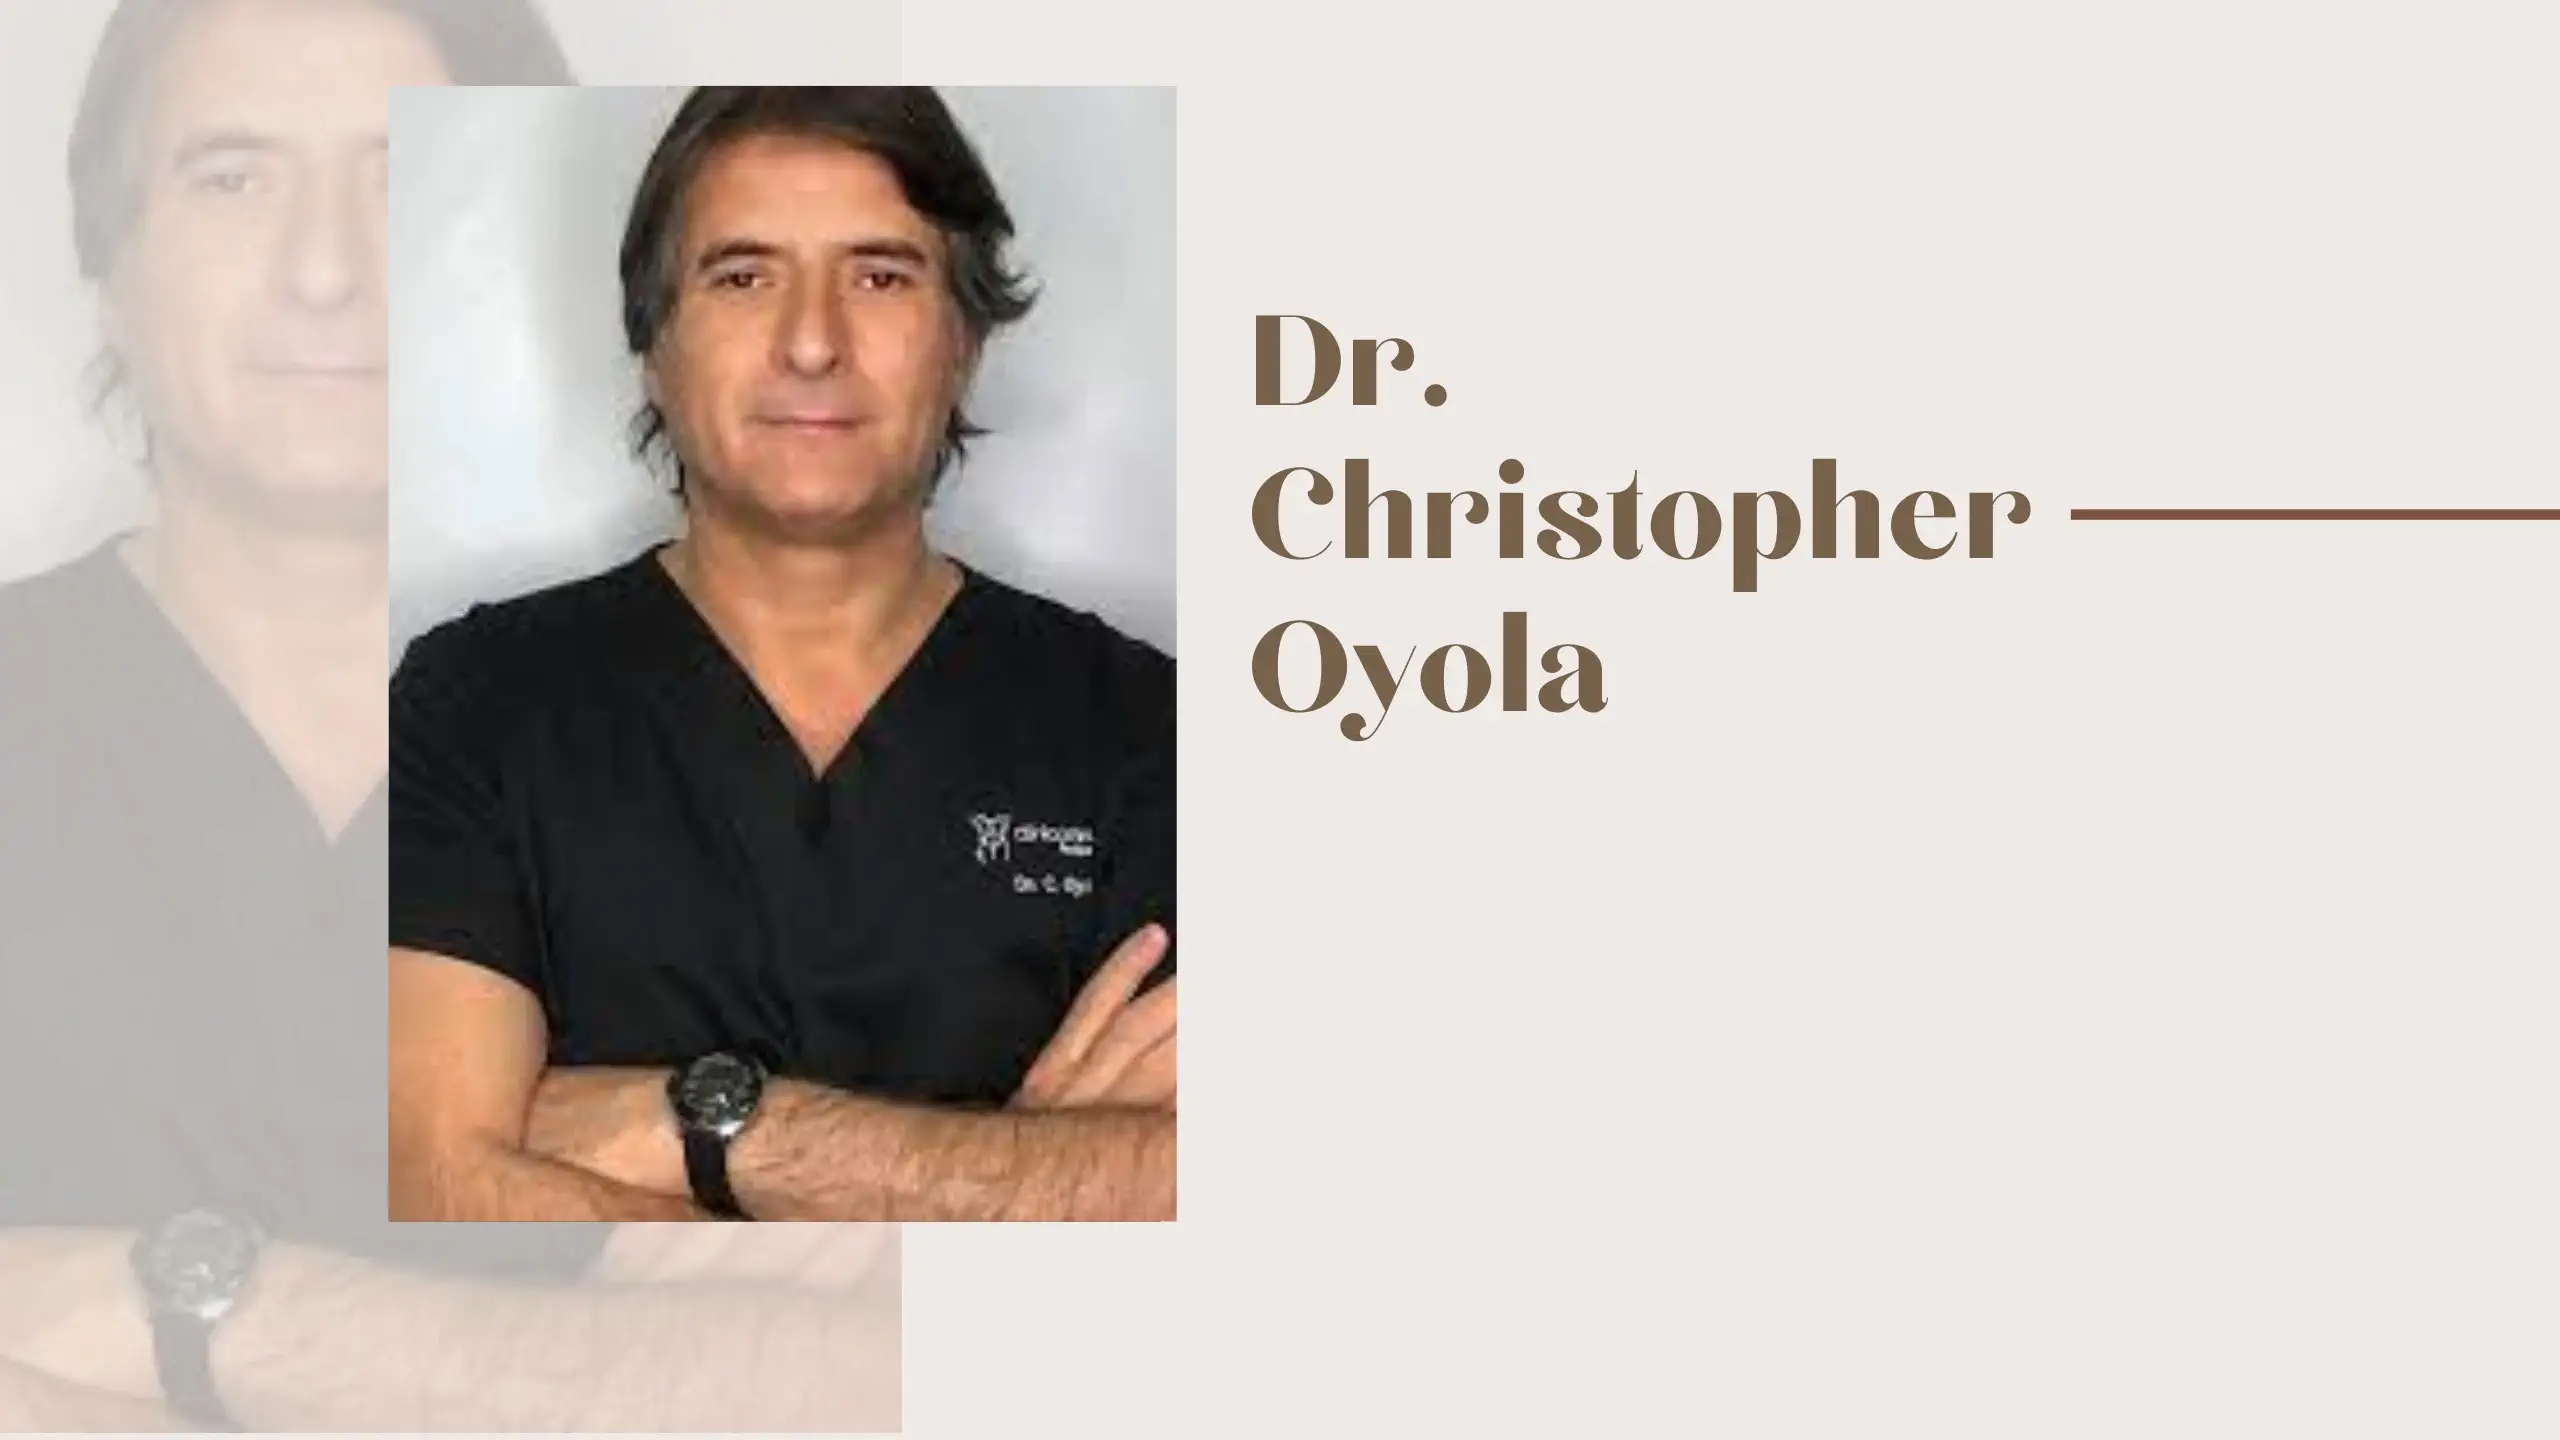 Dr. Christopher Oyola